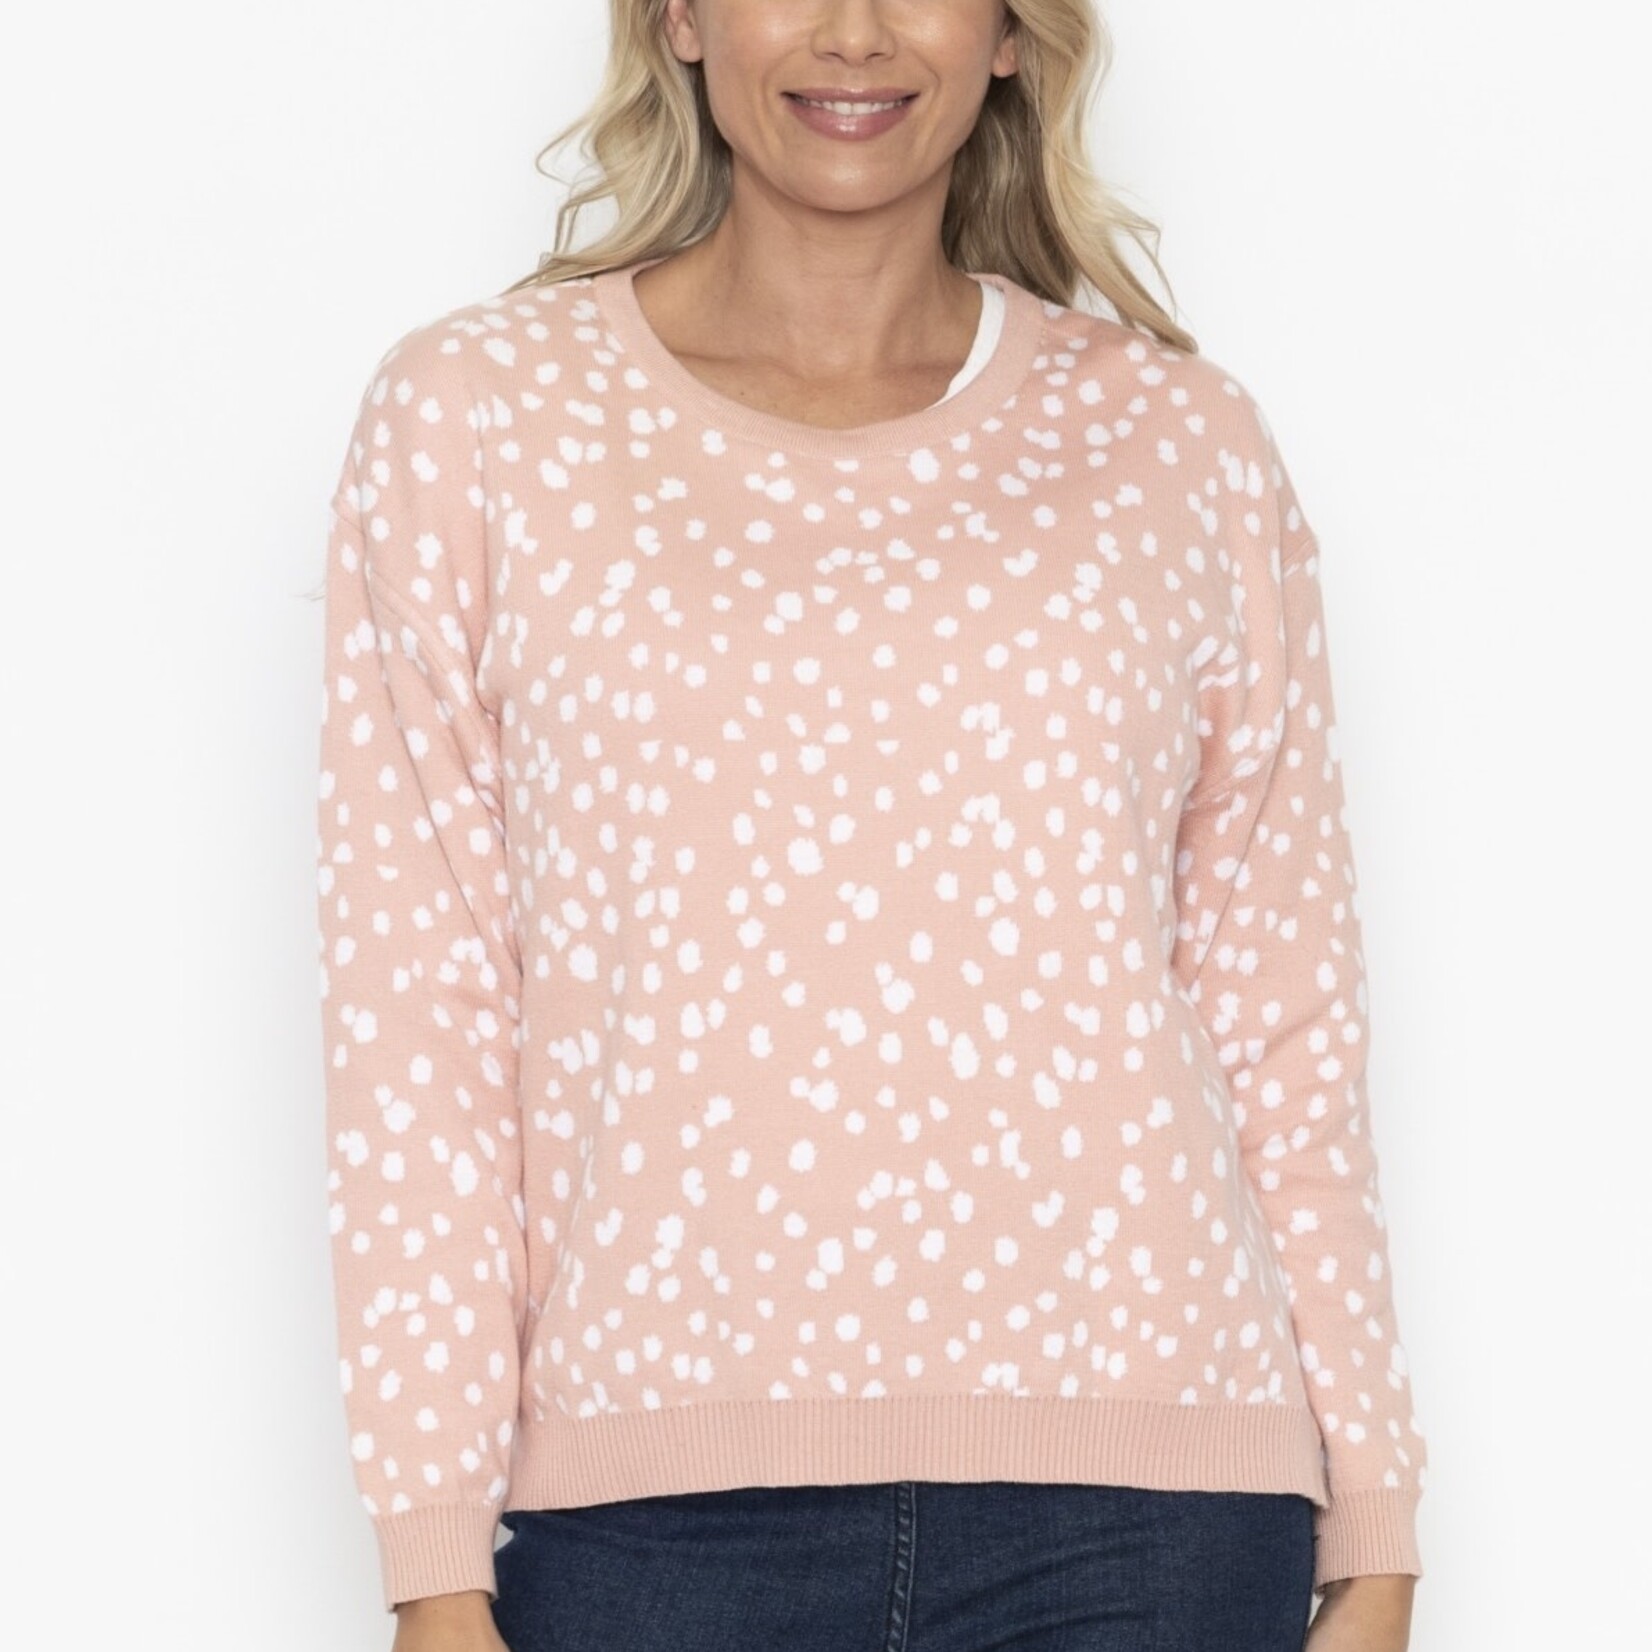 Orientique Clay Pink & White Reversible Jumper